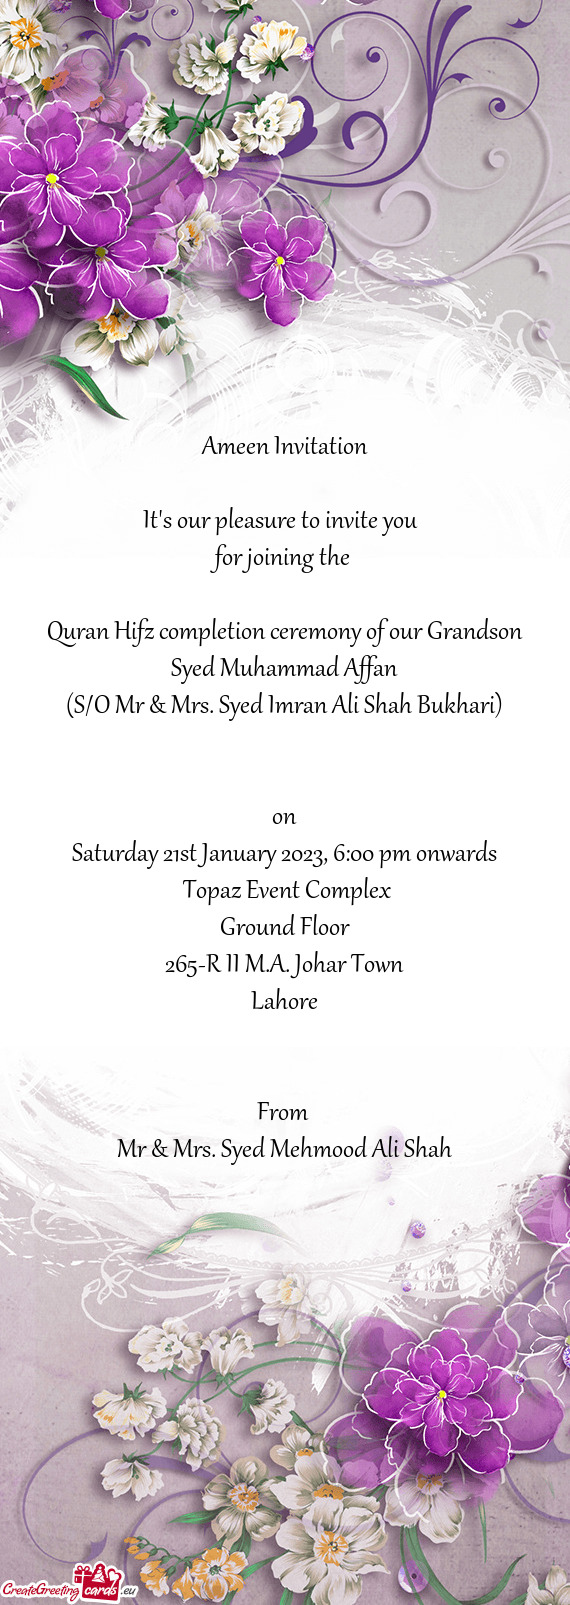 Quran Hifz completion ceremony of our Grandson